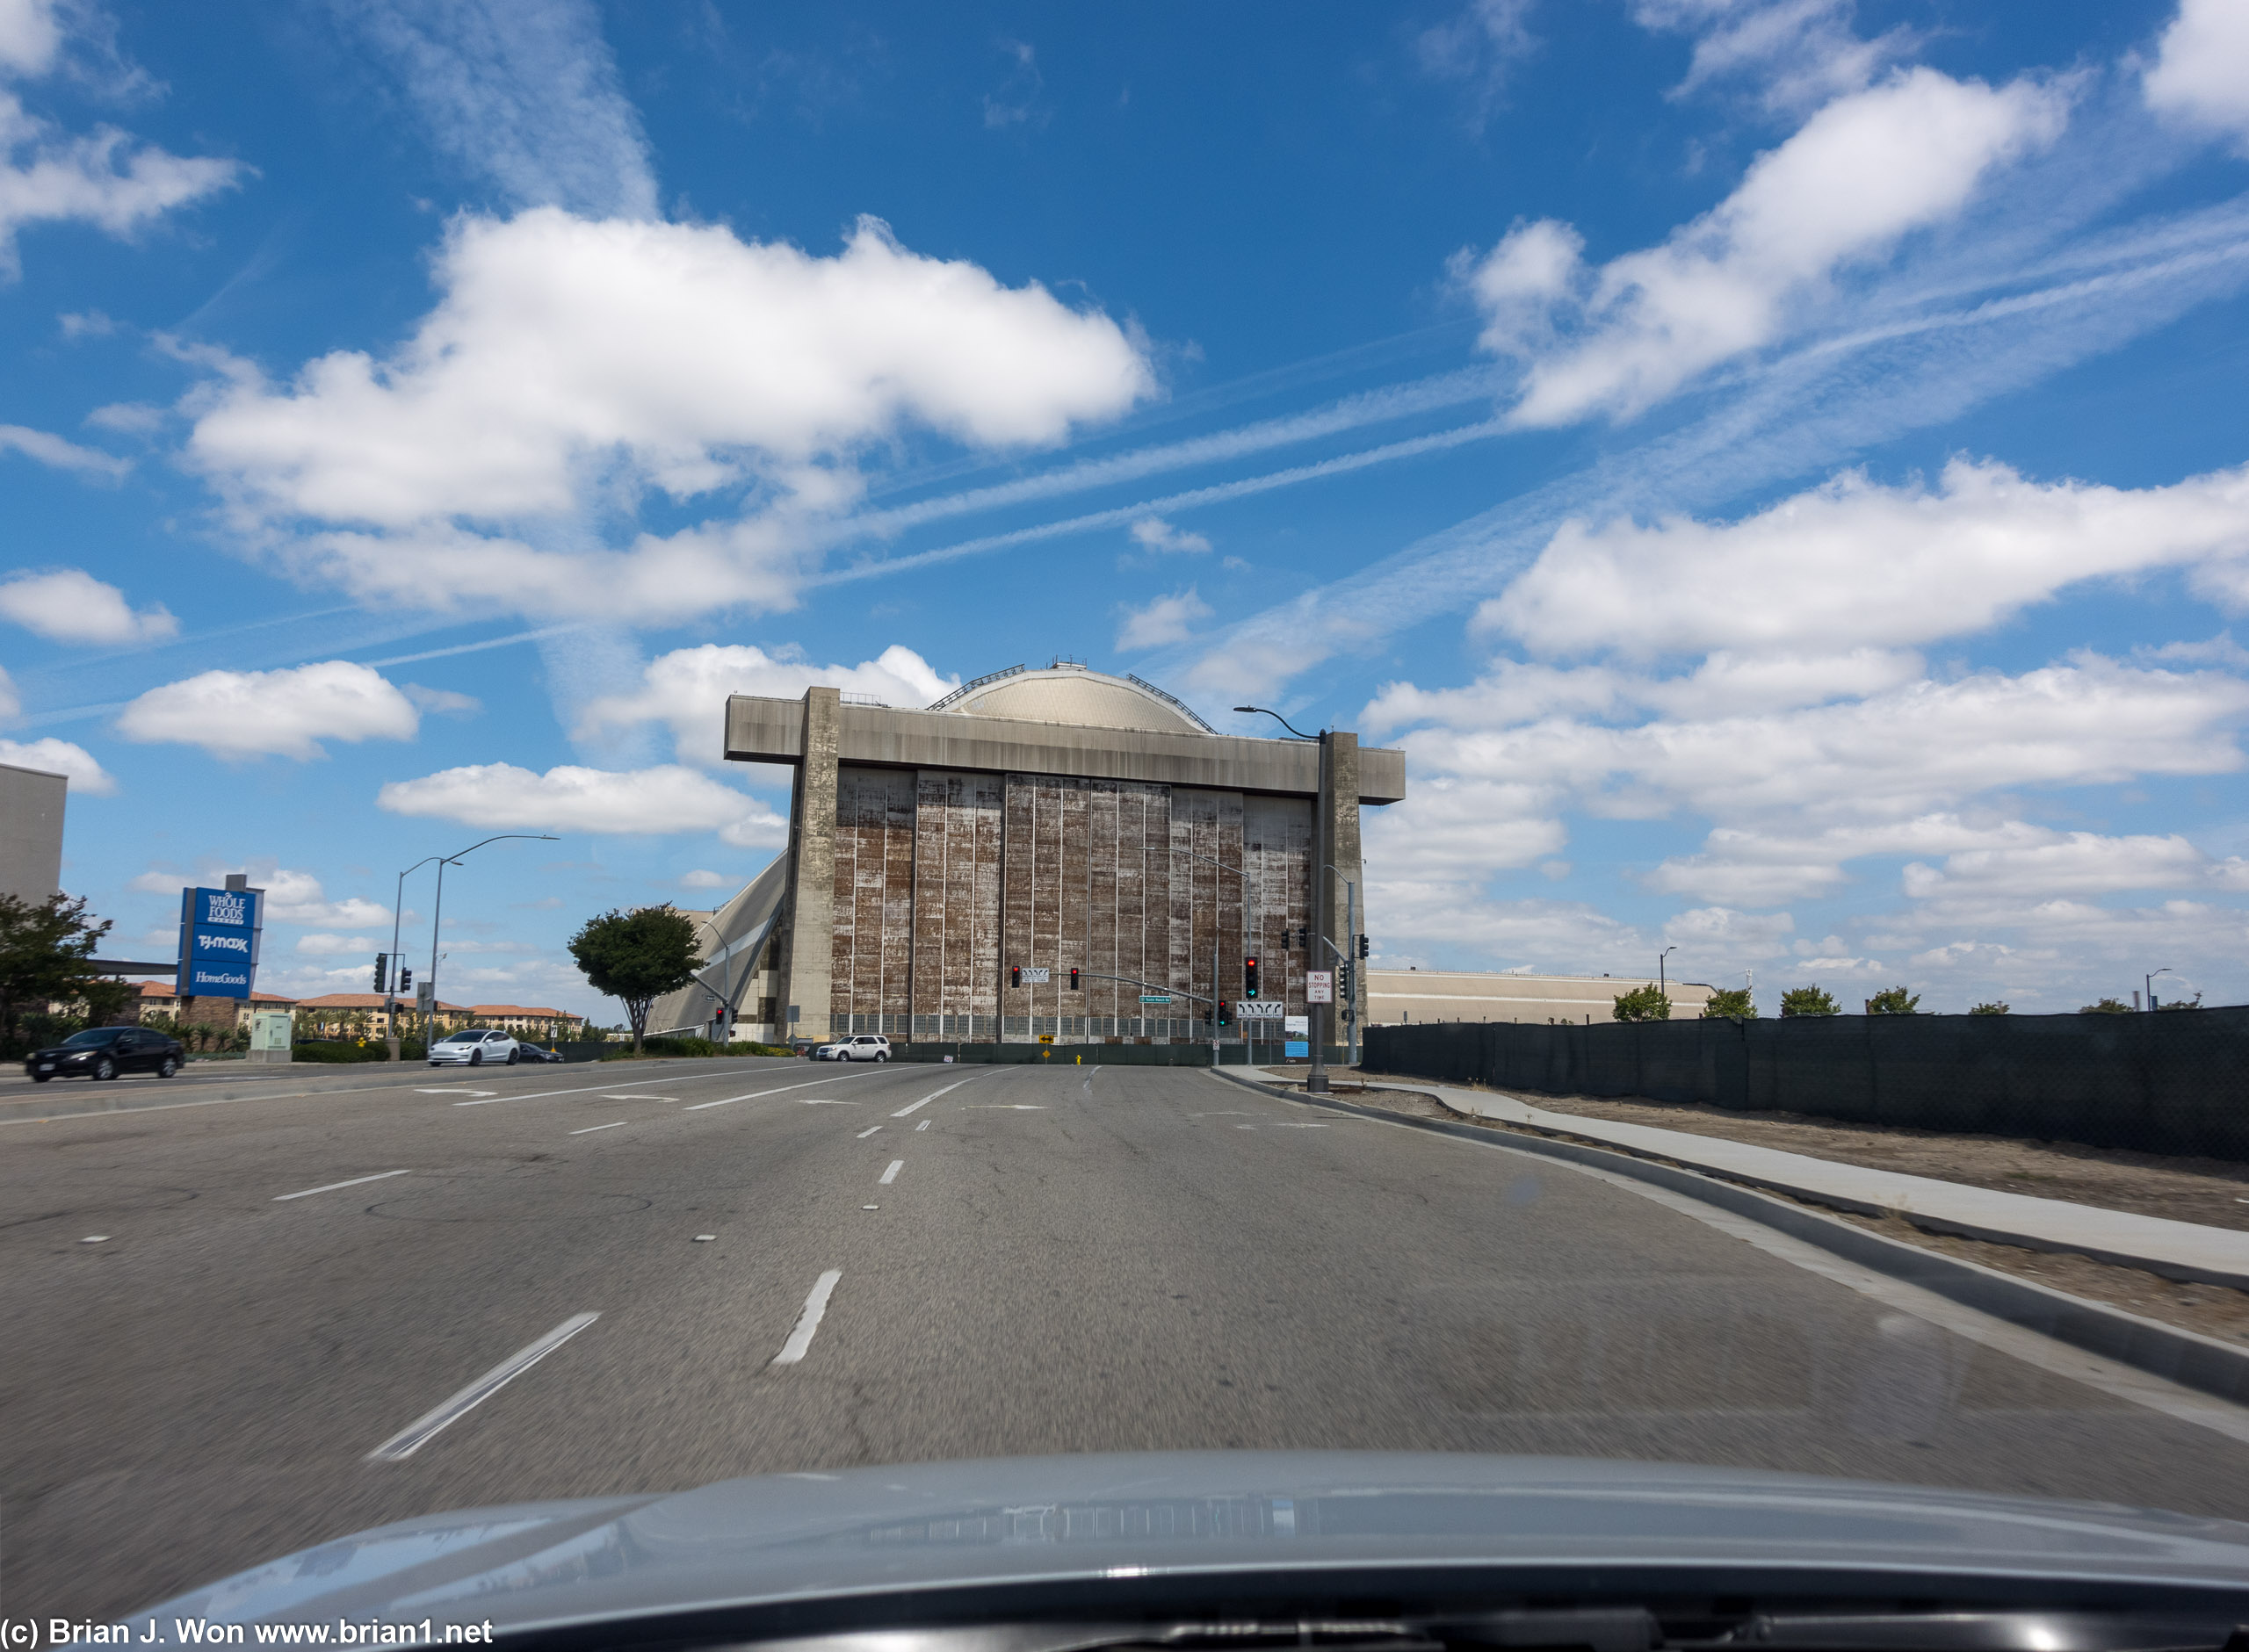 The hangars of the former Marine Corps Air Station Tustin.